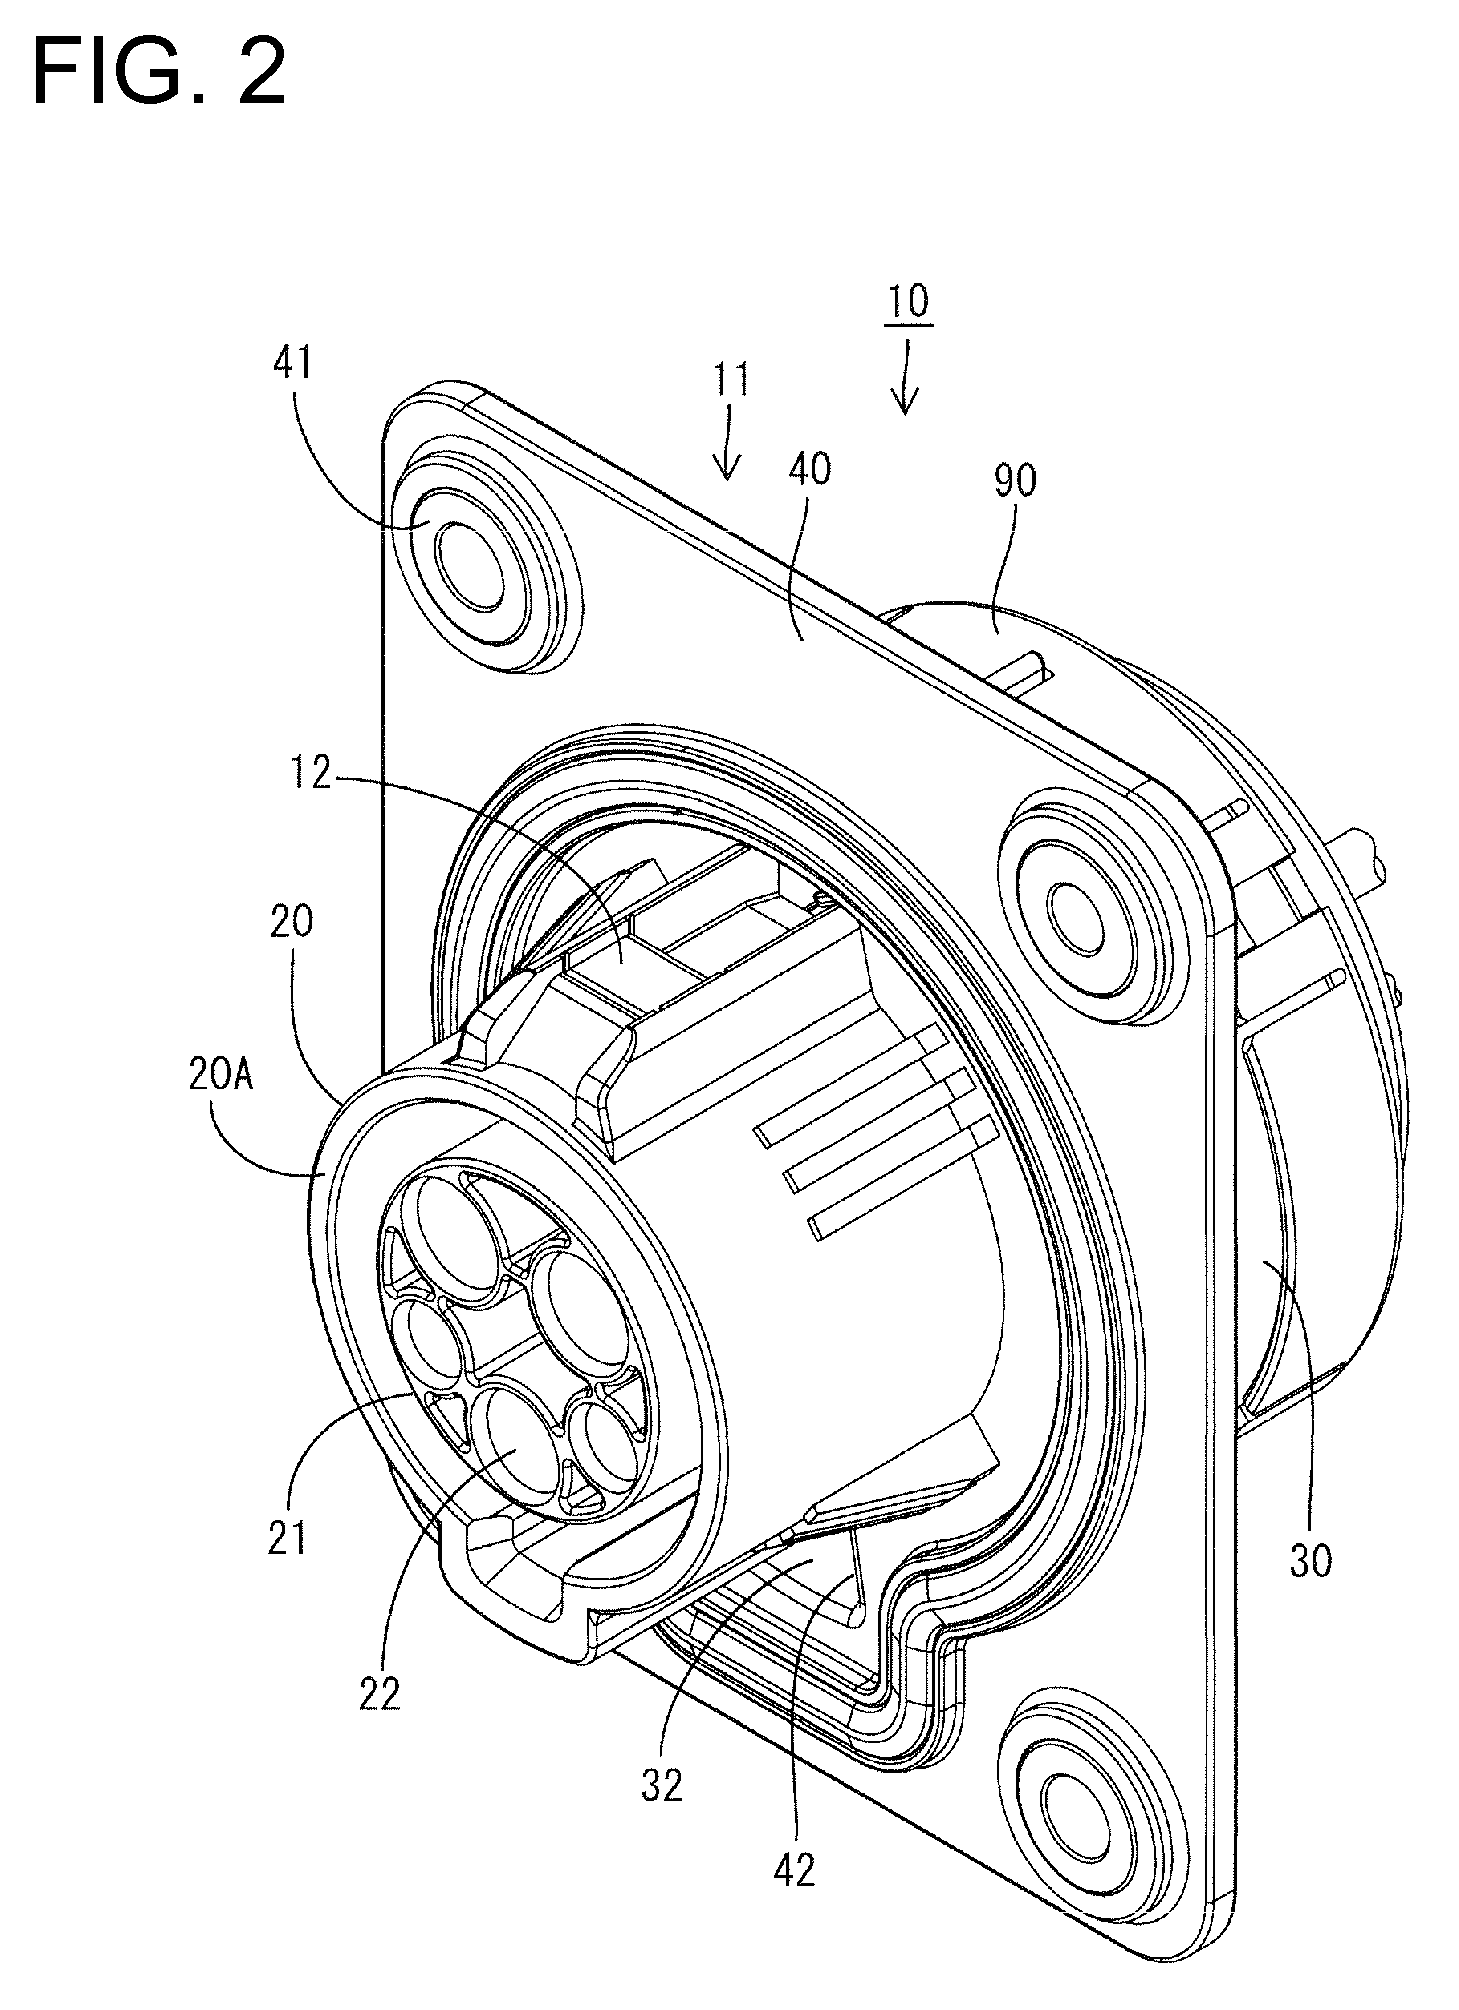 Vehicle-side connector